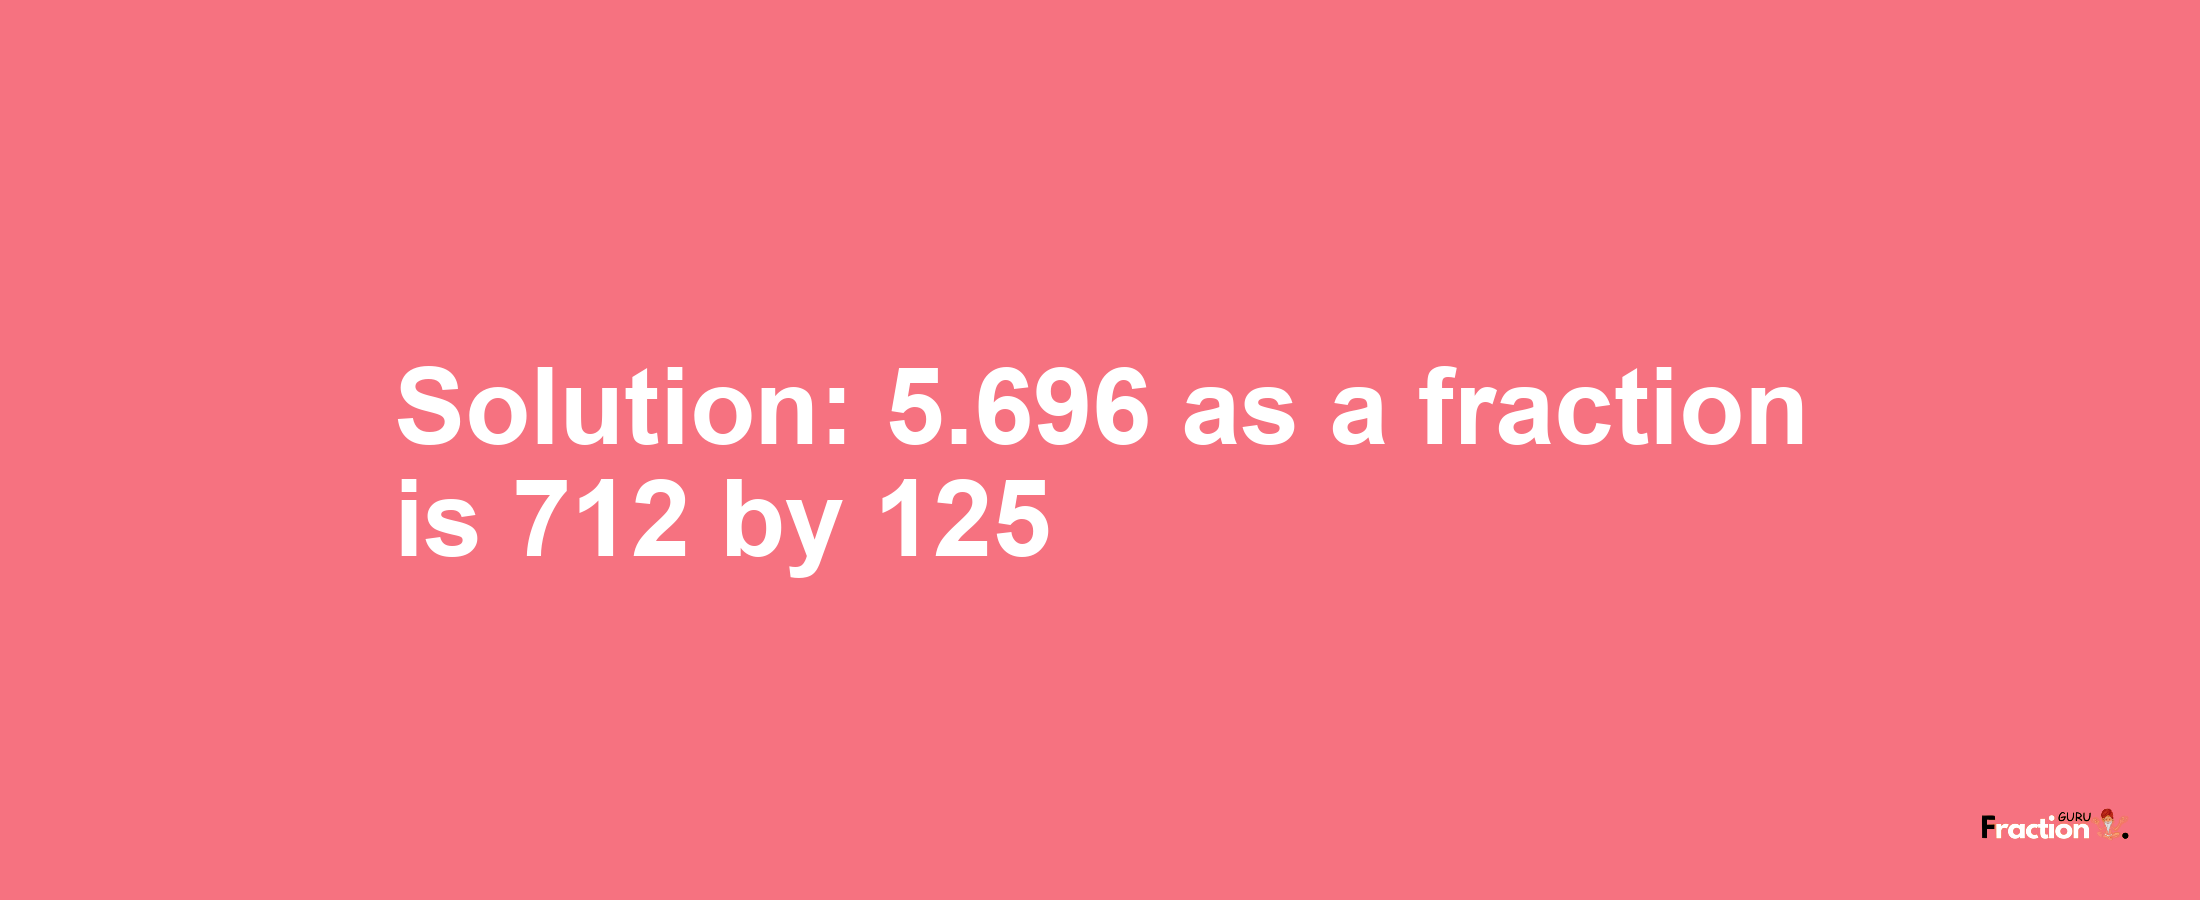 Solution:5.696 as a fraction is 712/125